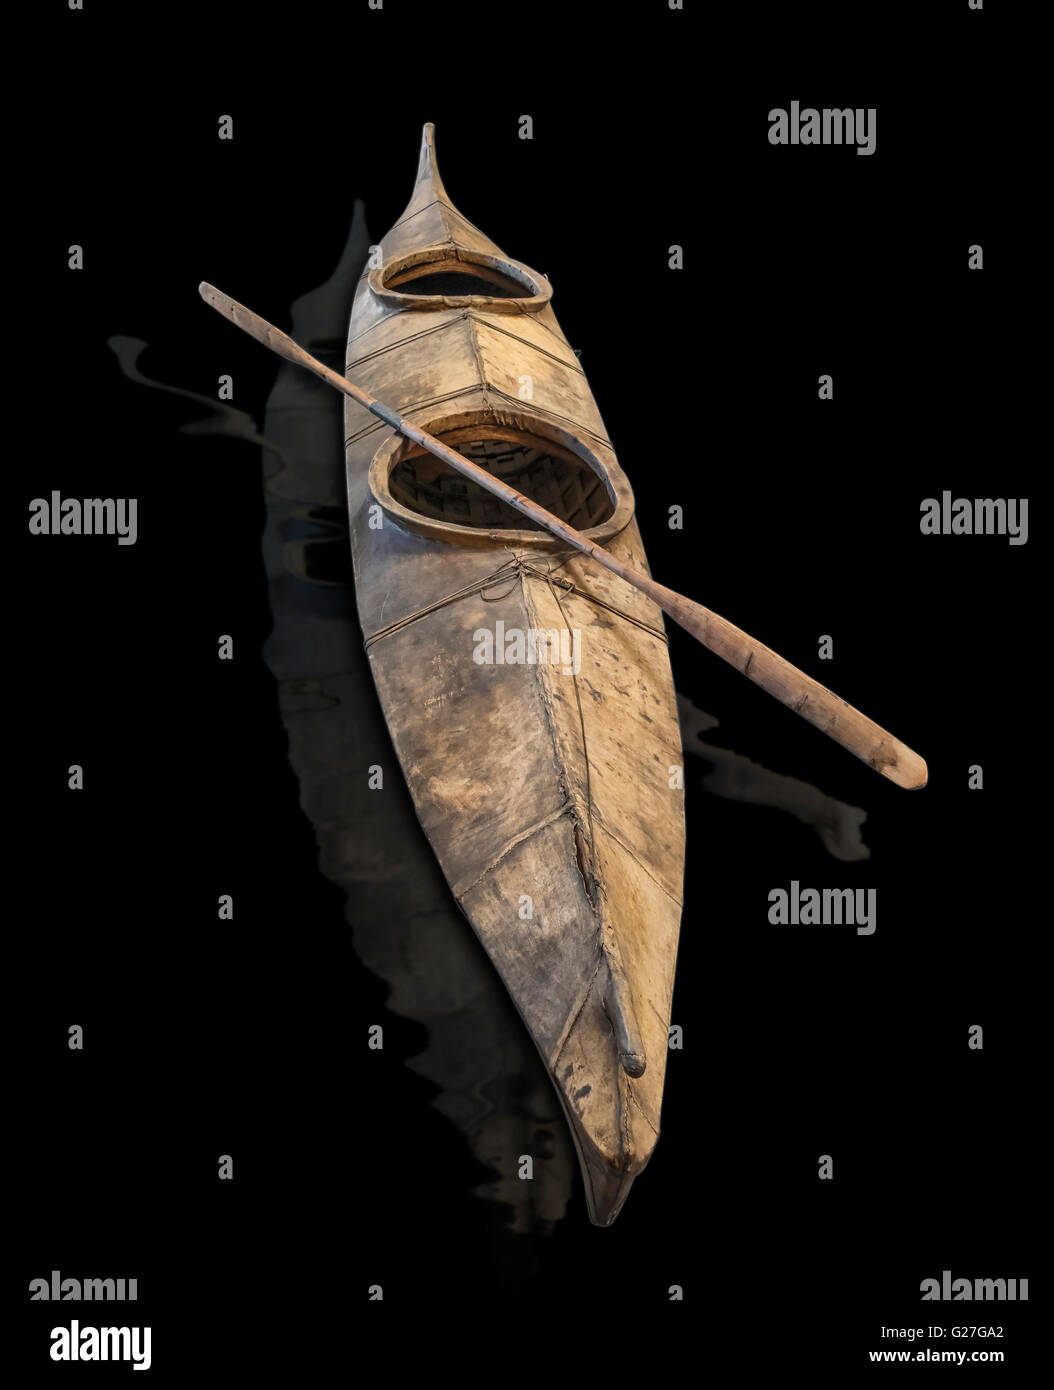 A Skin Kayak typical of craft built by Eskimos.The Inuit People are native to the Arctic regions,N.America,Greenland,and Russia Stock Photo